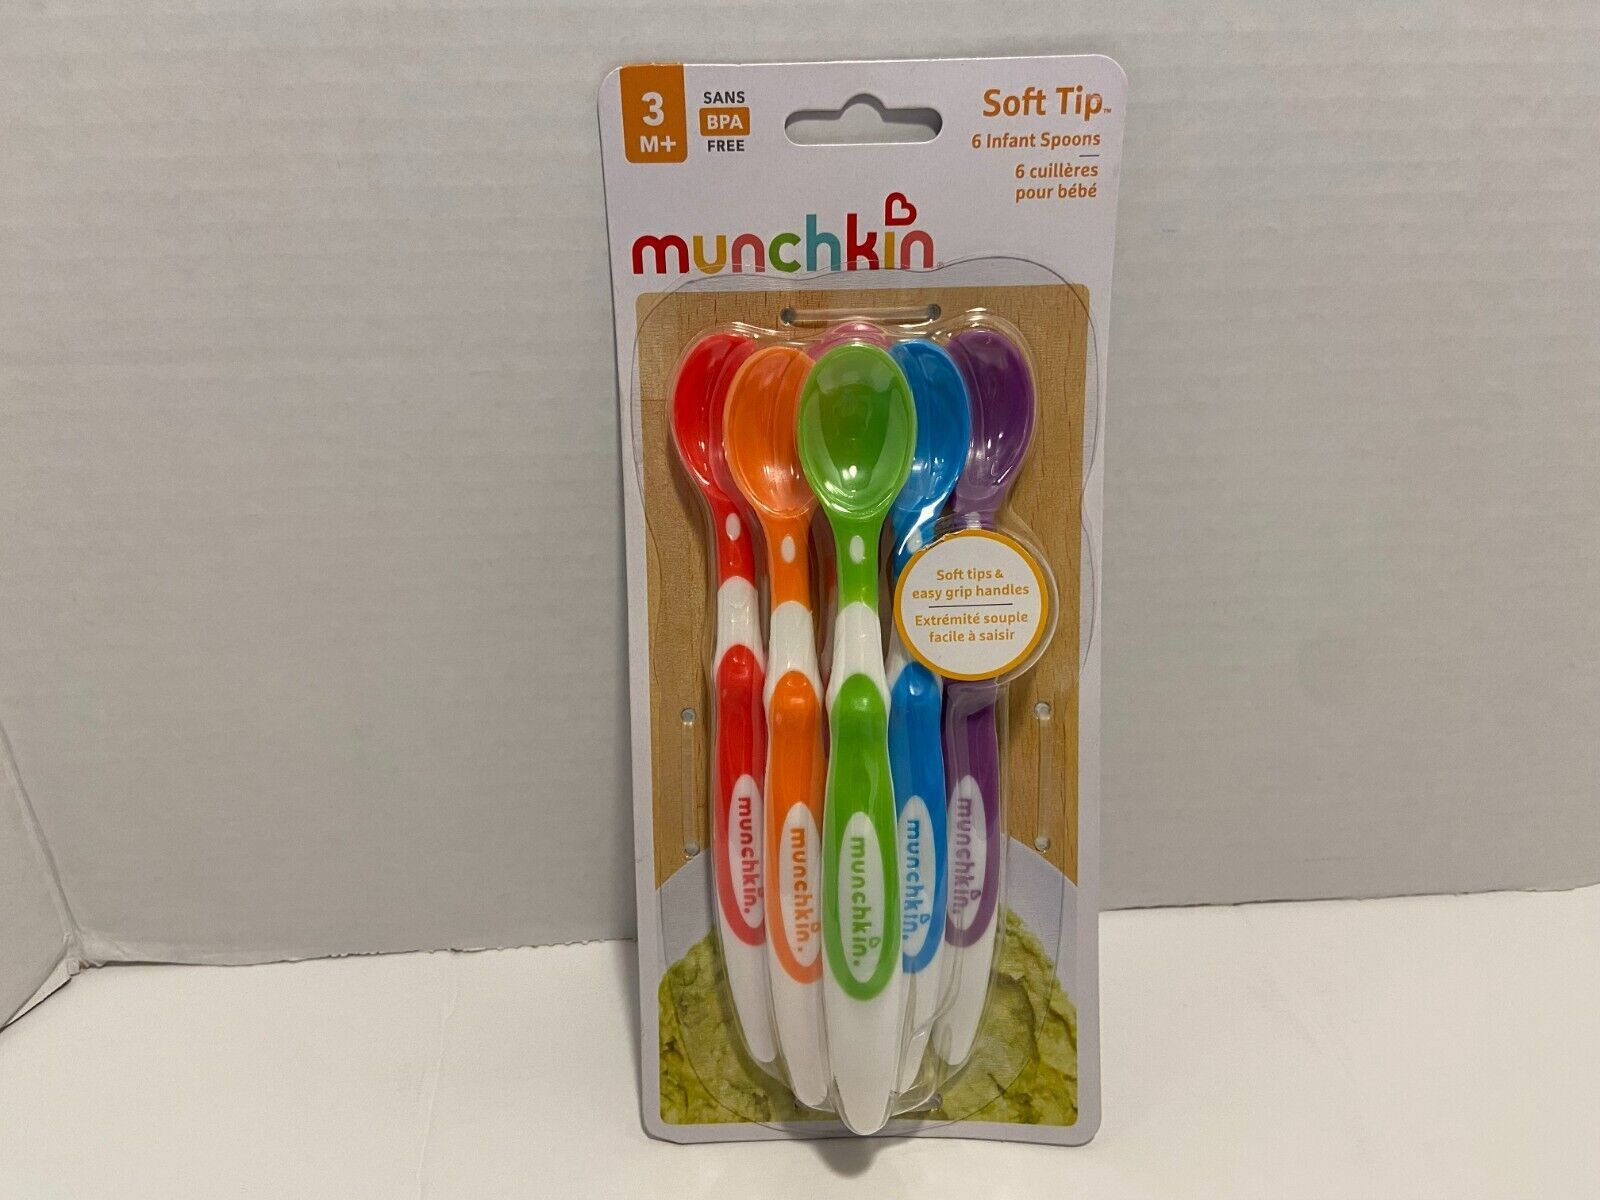 Munchkin 10062 Soft-Tip Infant Spoons - Multi-Color (Pack of 6) - $5.45